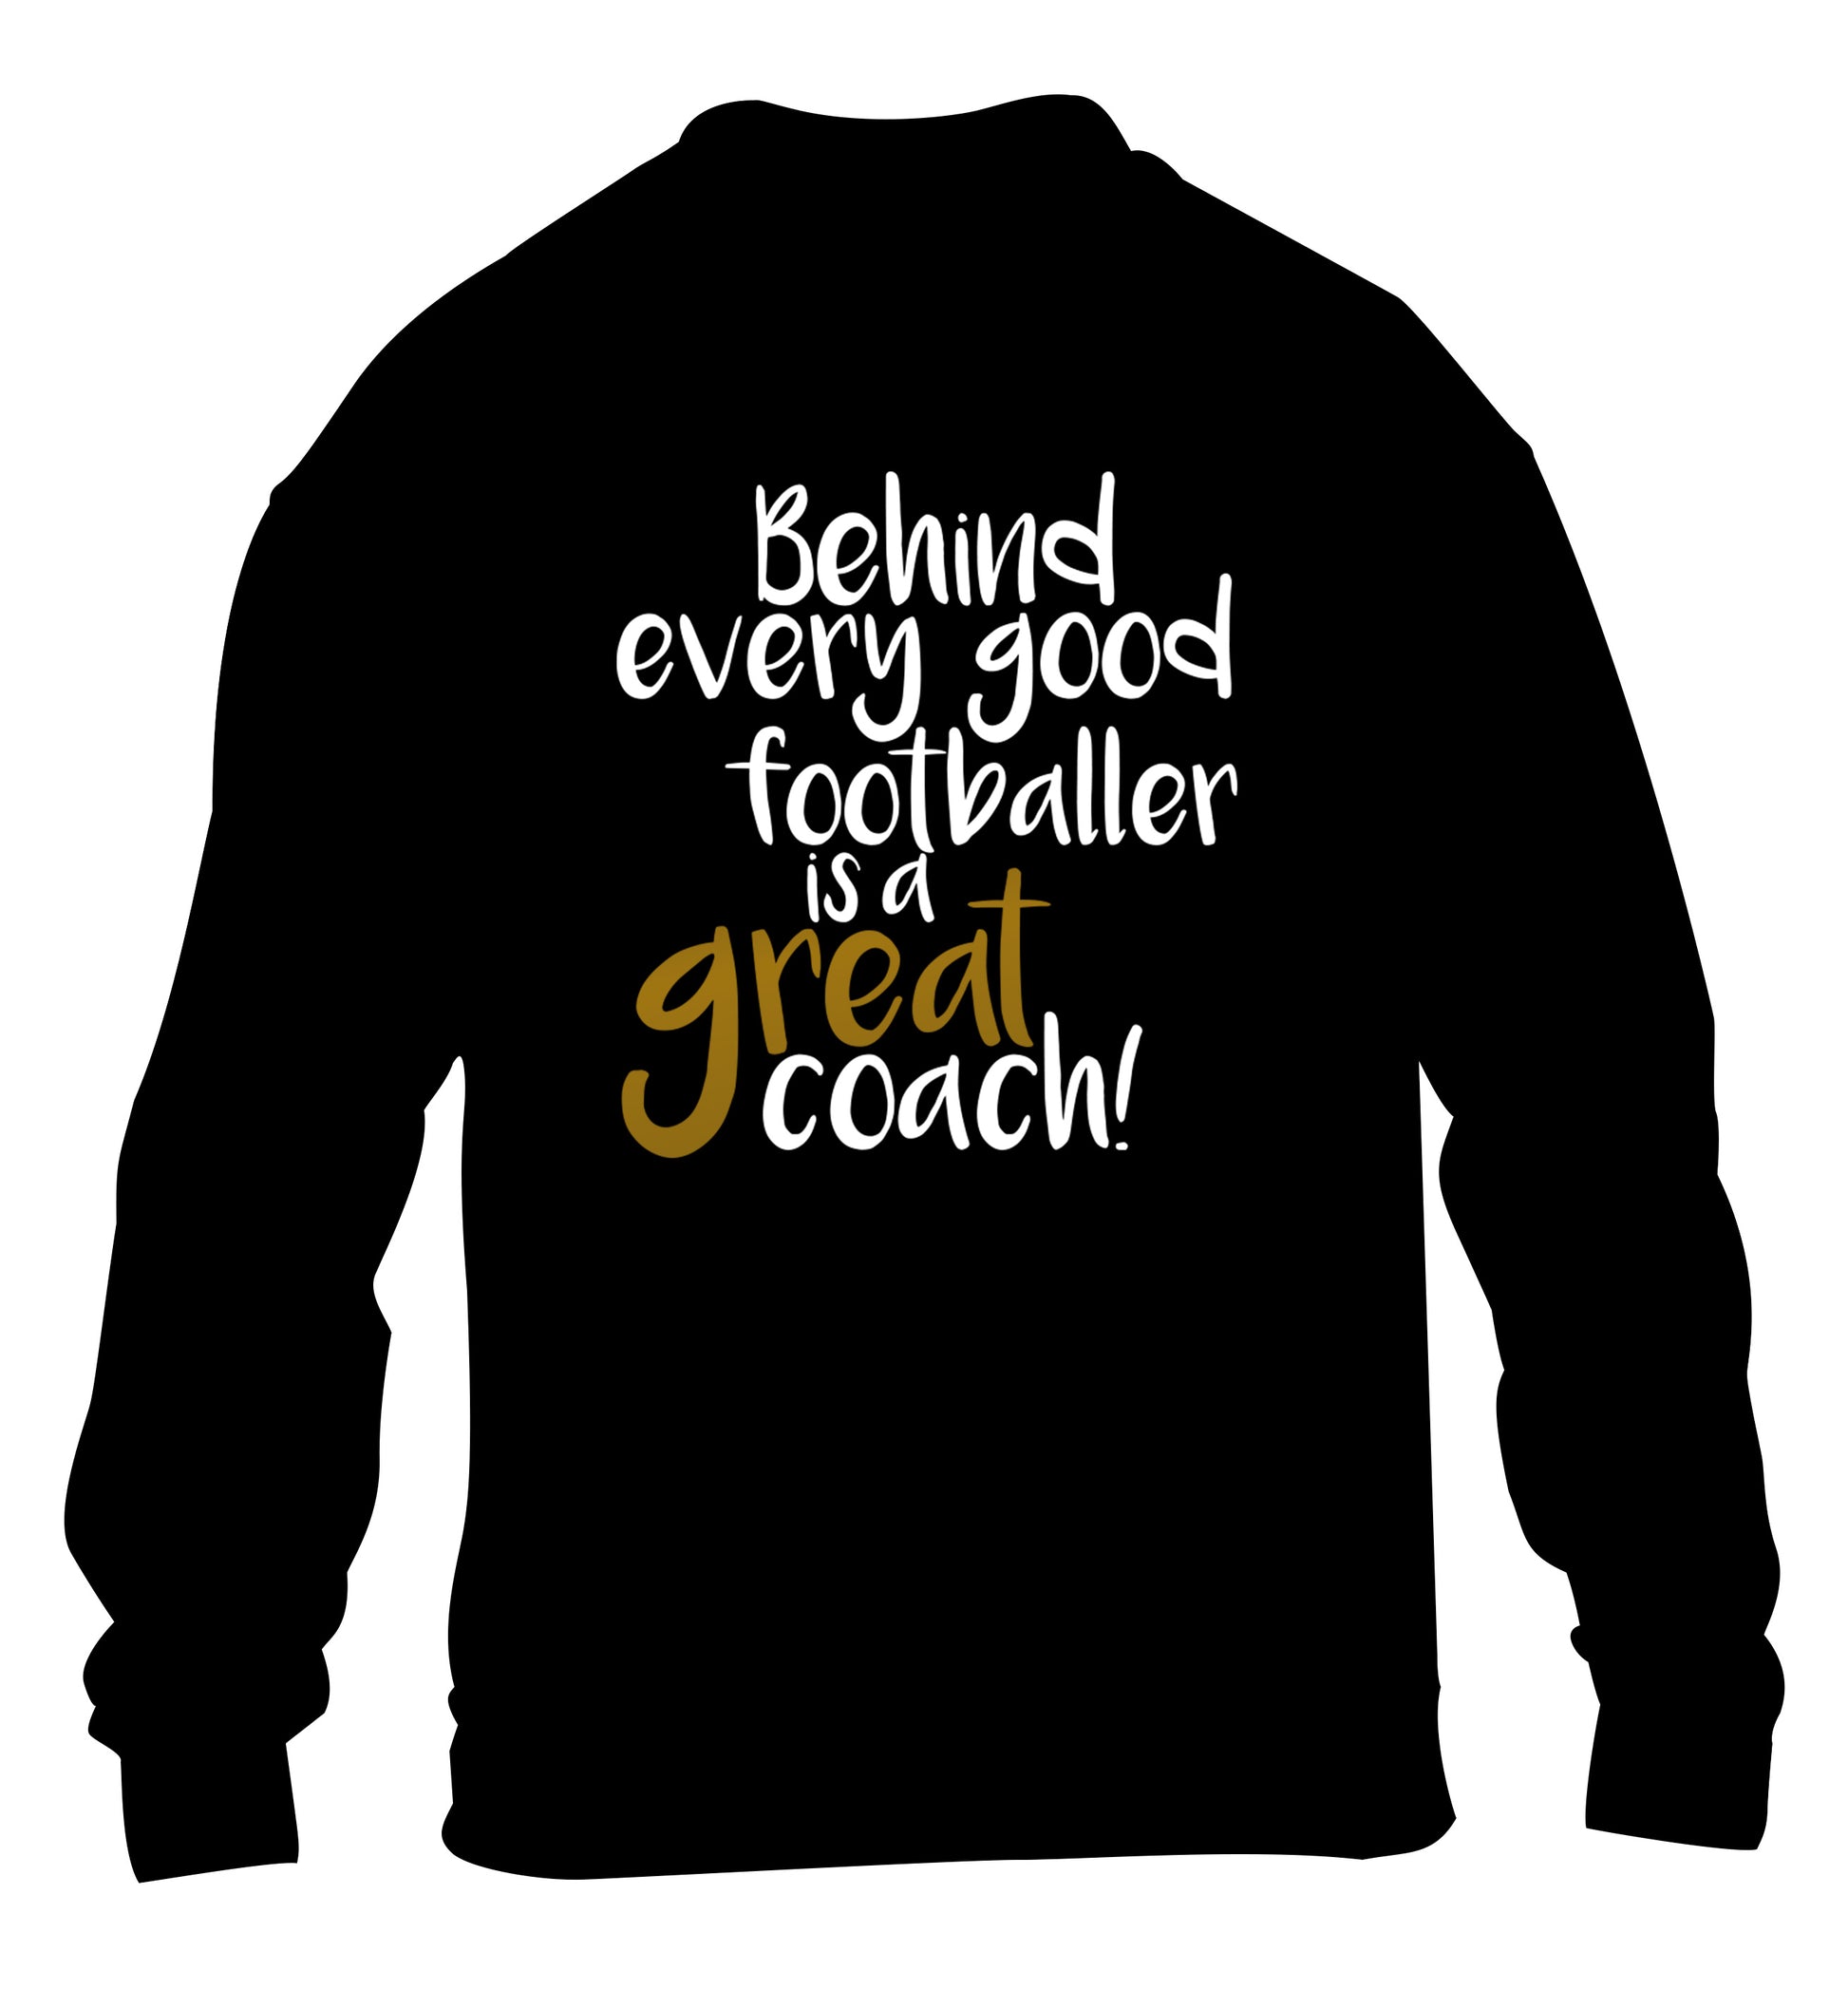 Behind every good footballer is a great coach! children's black sweater 12-14 Years